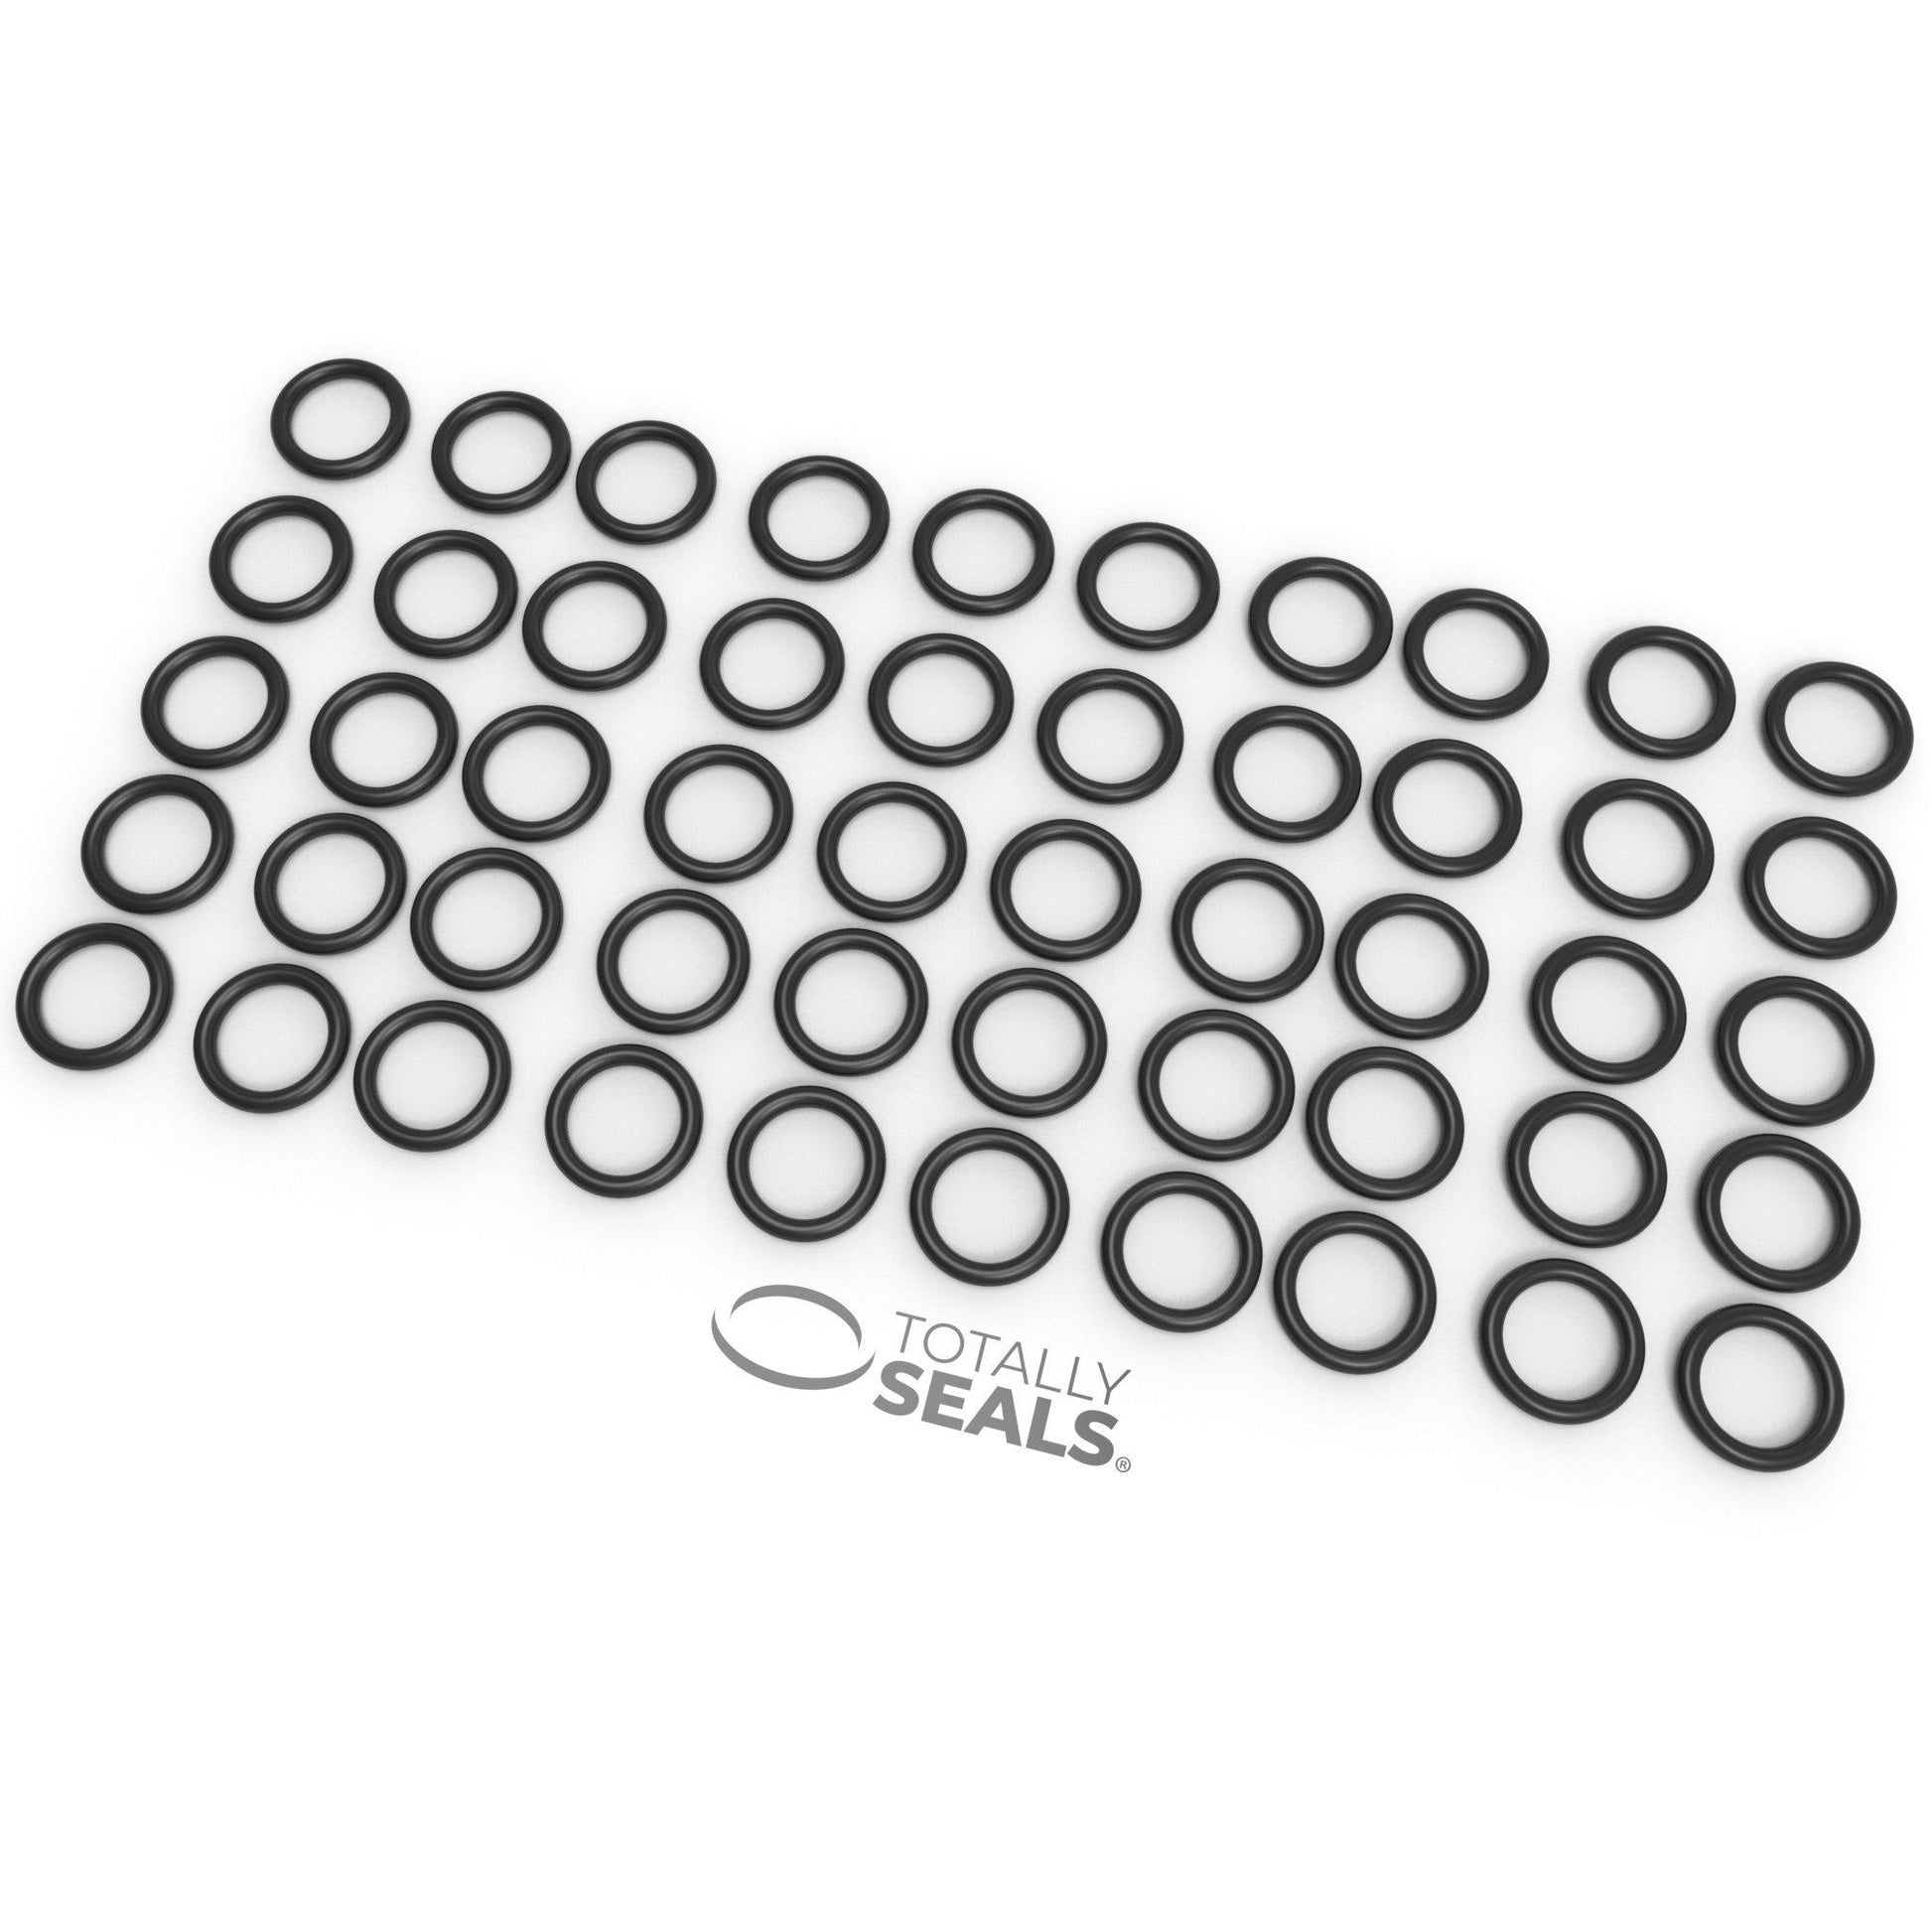 28mm x 1.5mm (31mm OD) Nitrile O-Rings - Totally Seals®